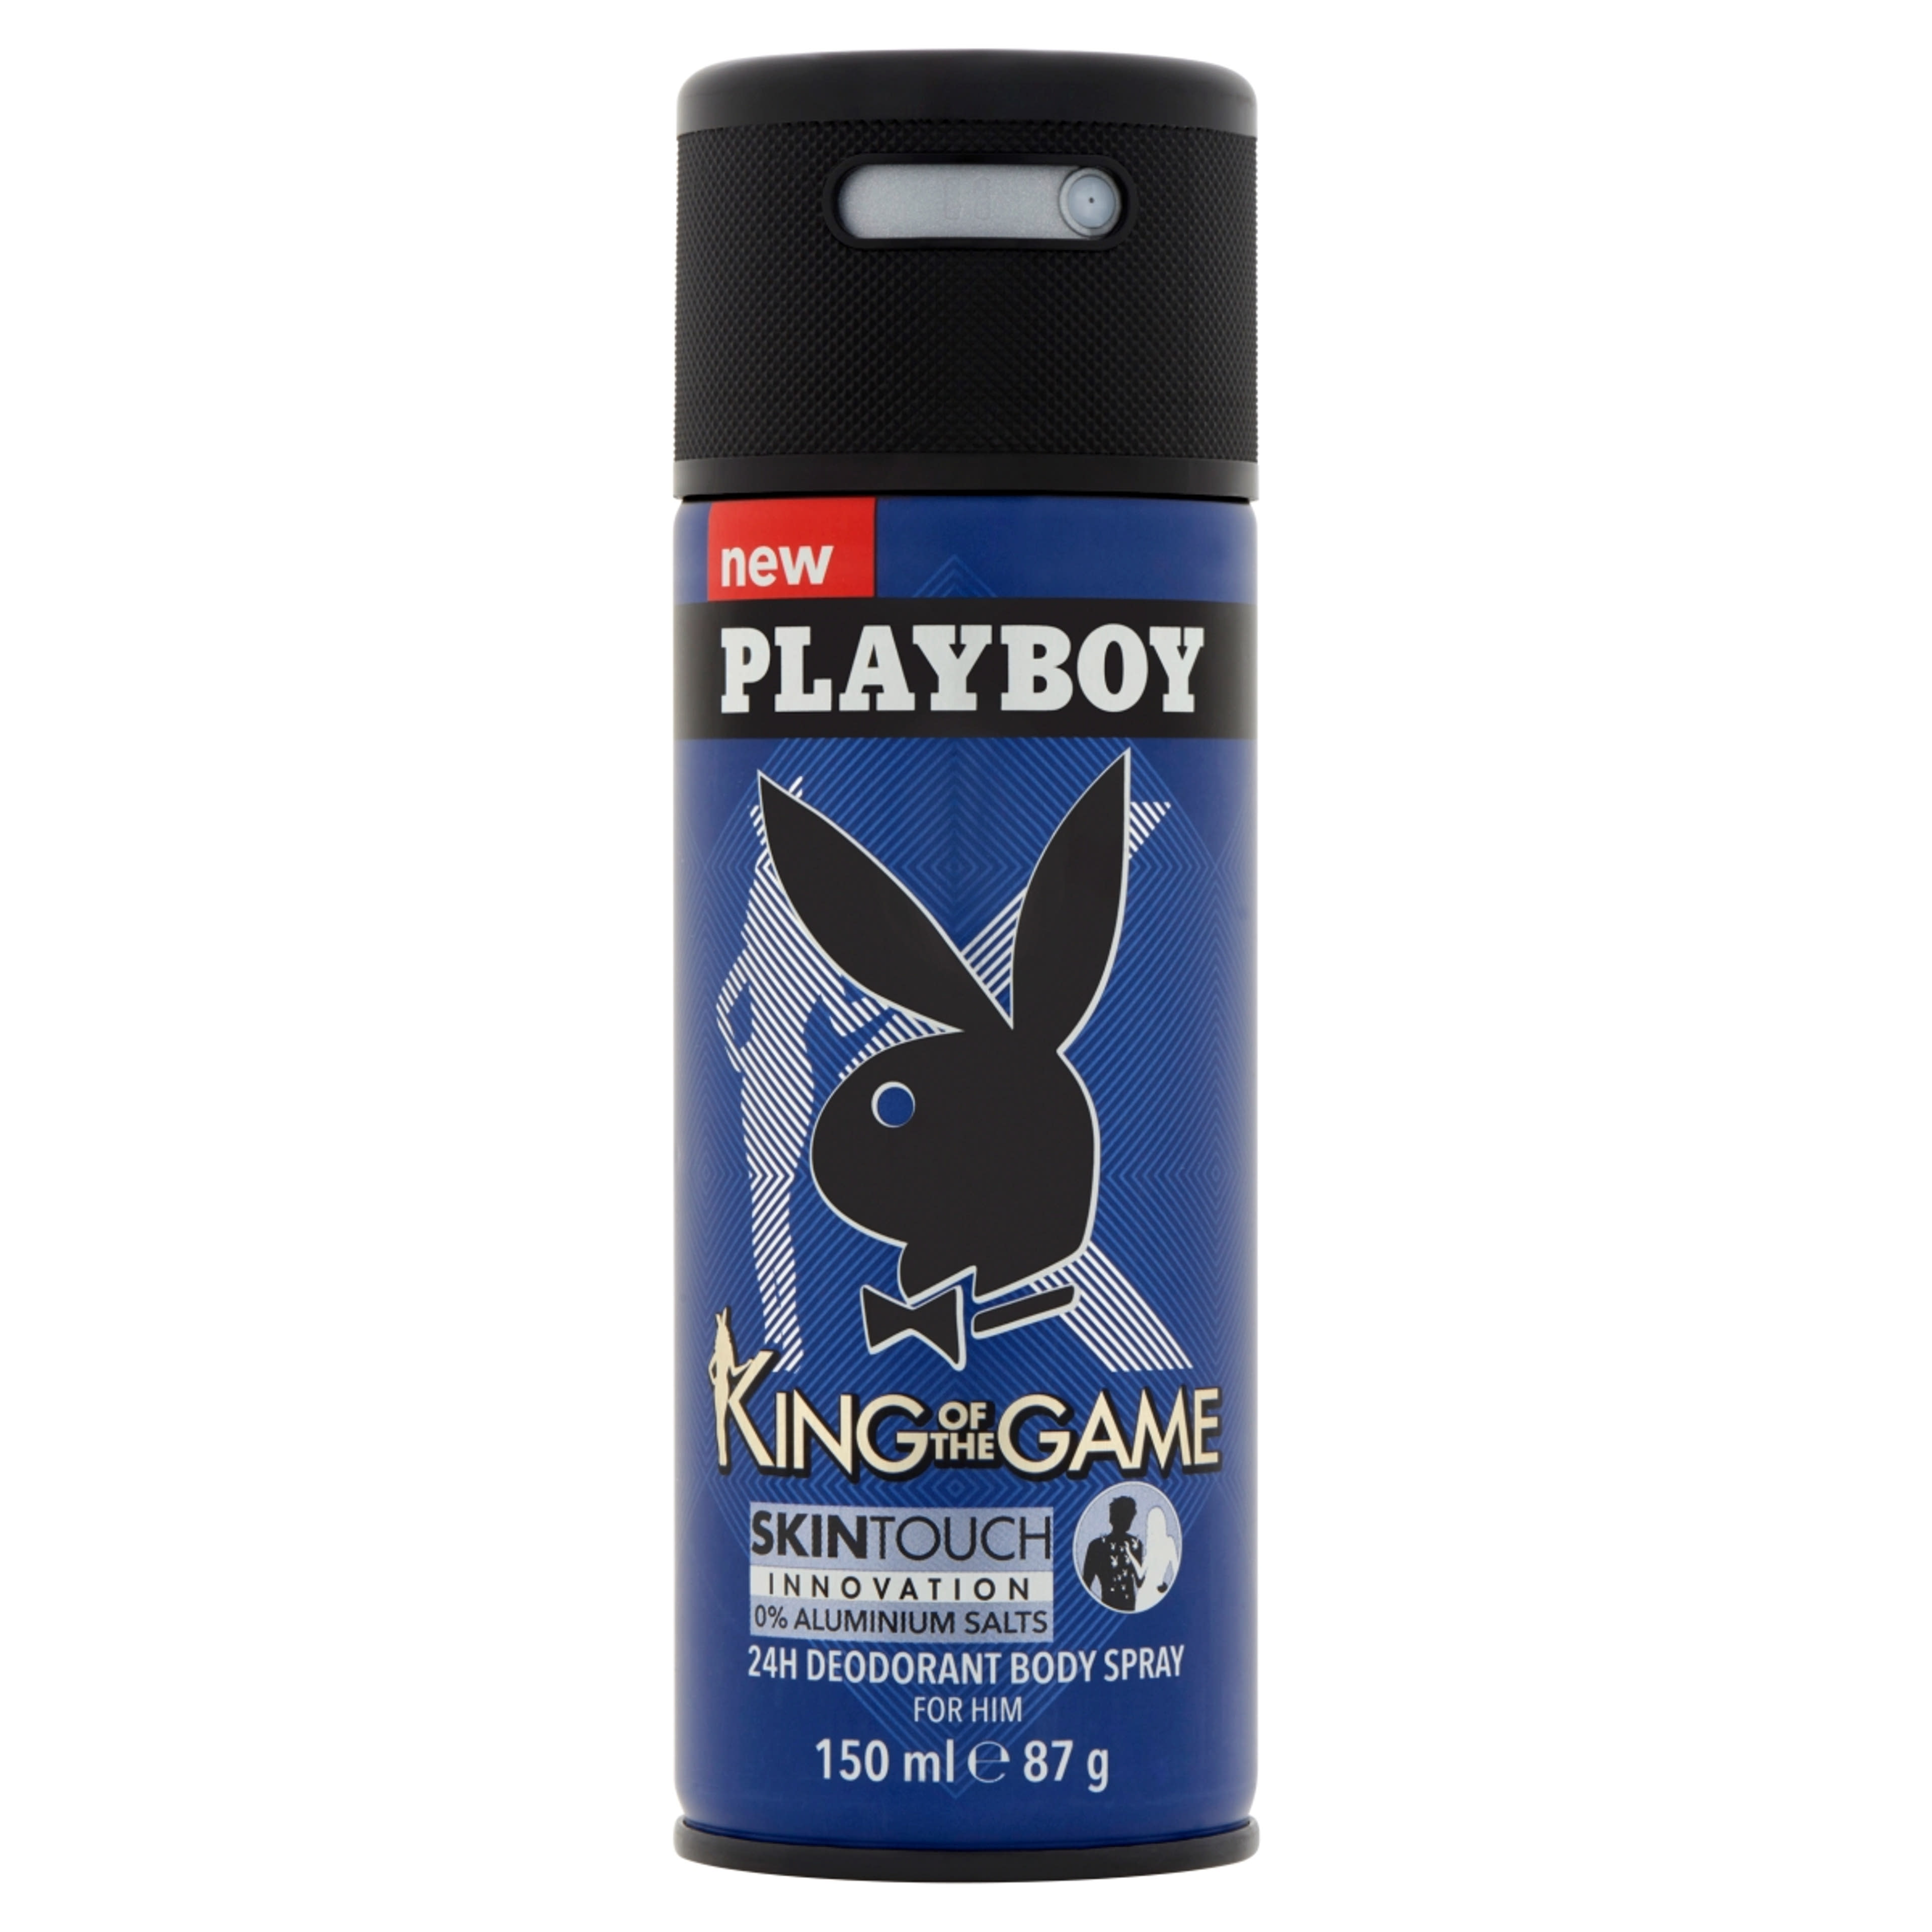 Playboy King of the Game dezodor - 150 ml-1